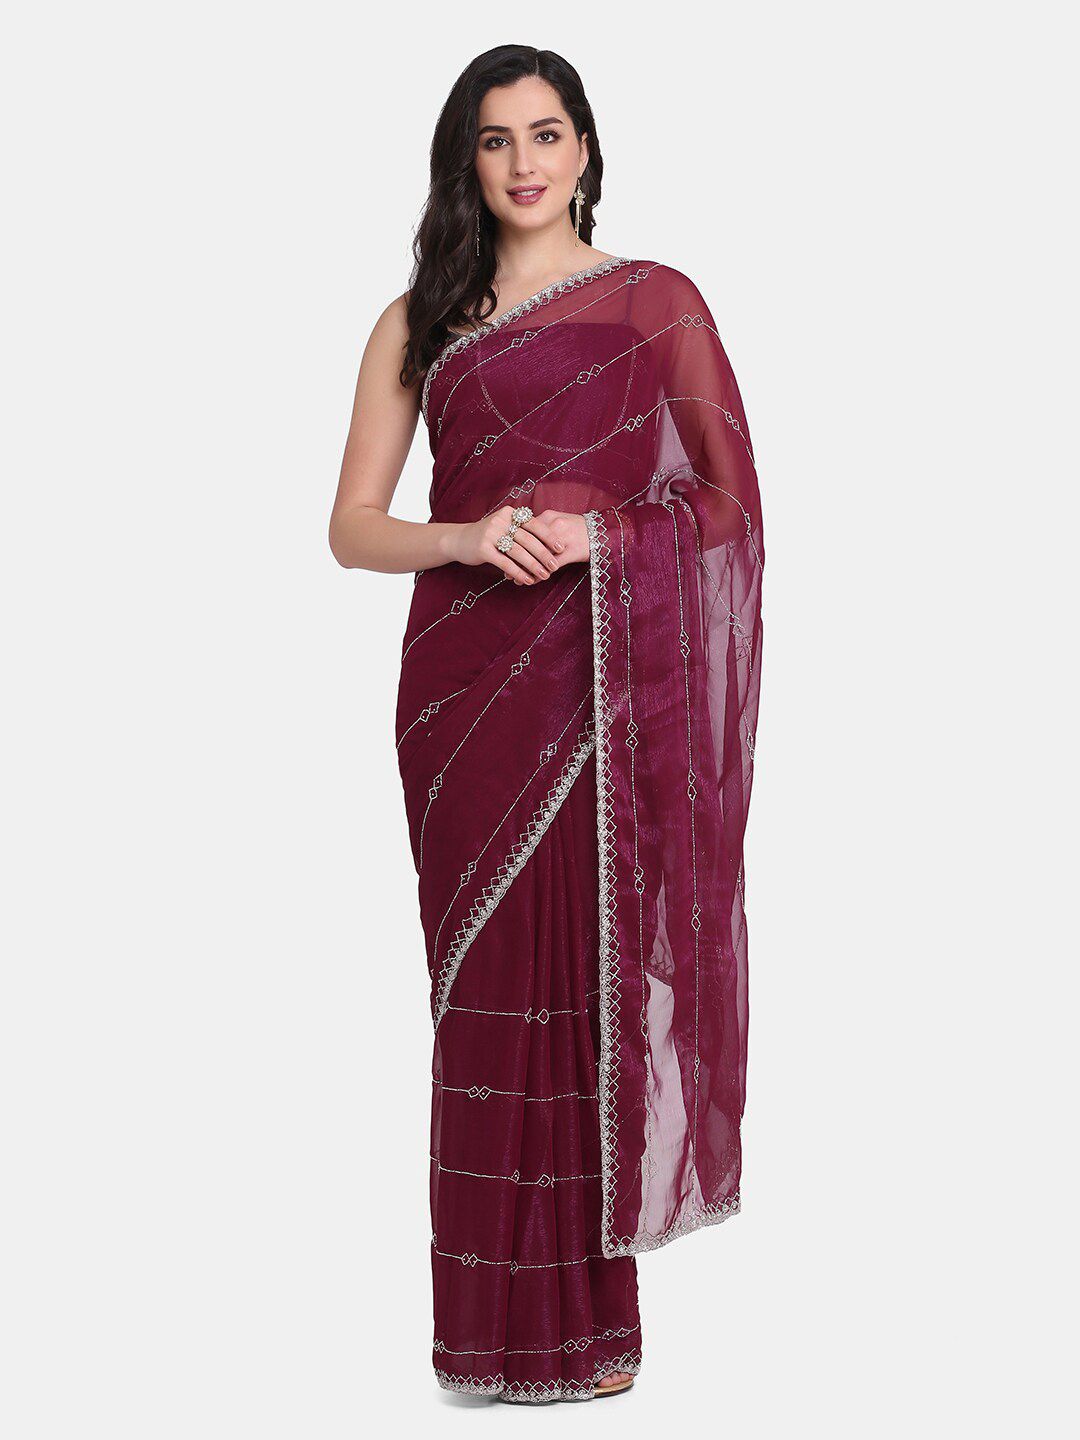 BOMBAY SELECTIONS Burgundy & Silver-Toned Striped Beads and Stones Organza Saree Price in India